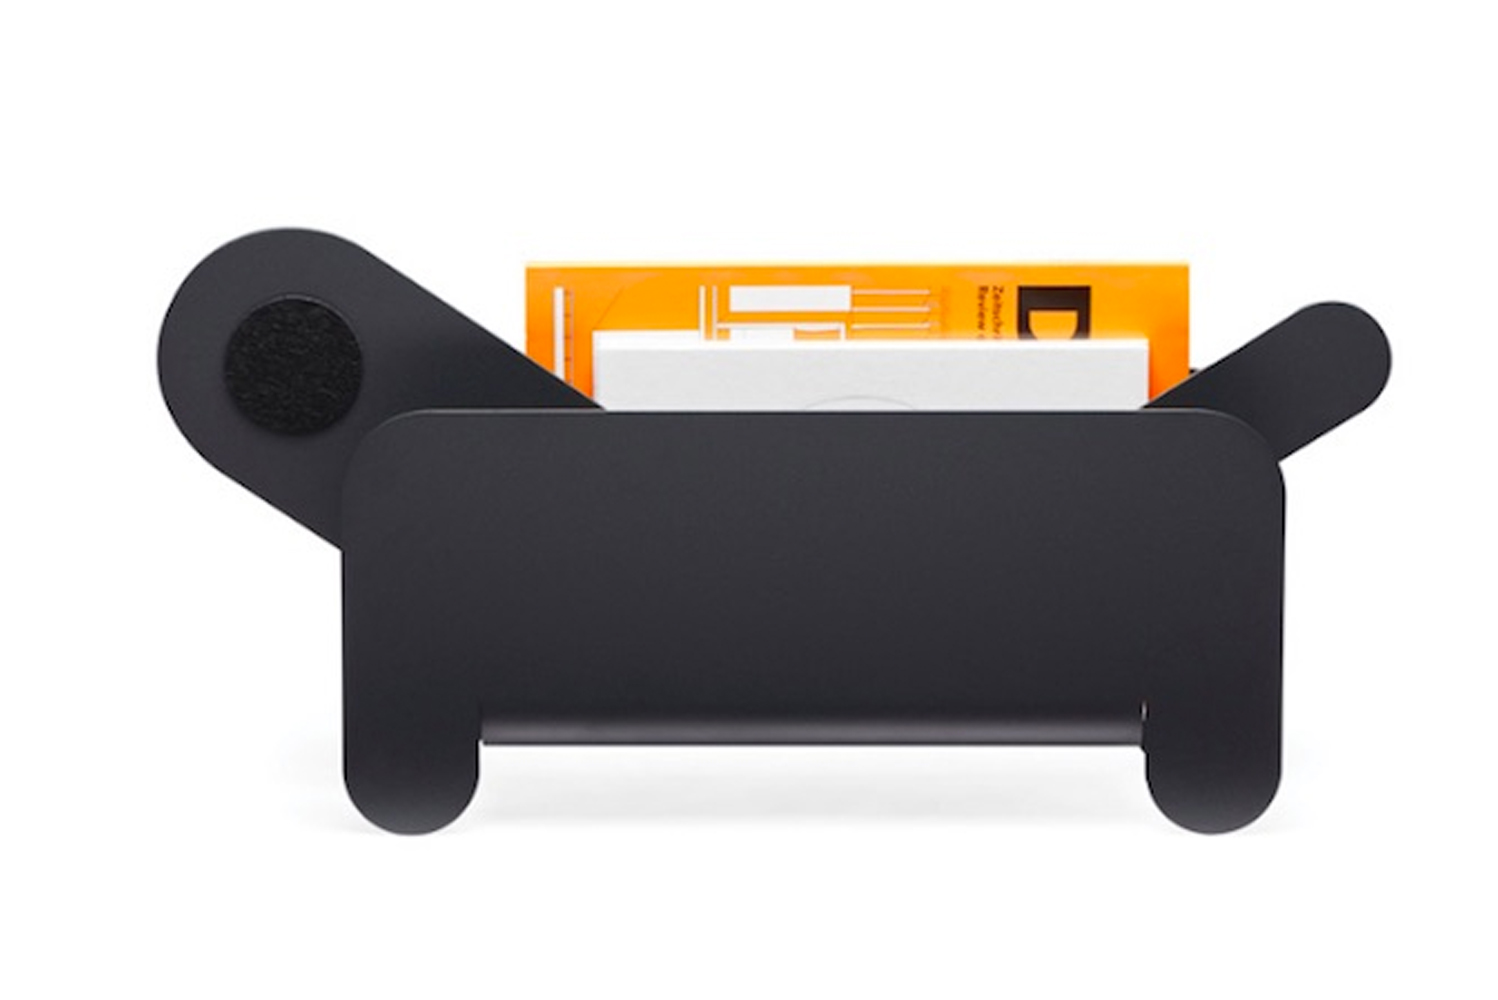 Netherlands-based international design agency Frederick Roije launched Paper Pet a magazine rack inspired by pets 